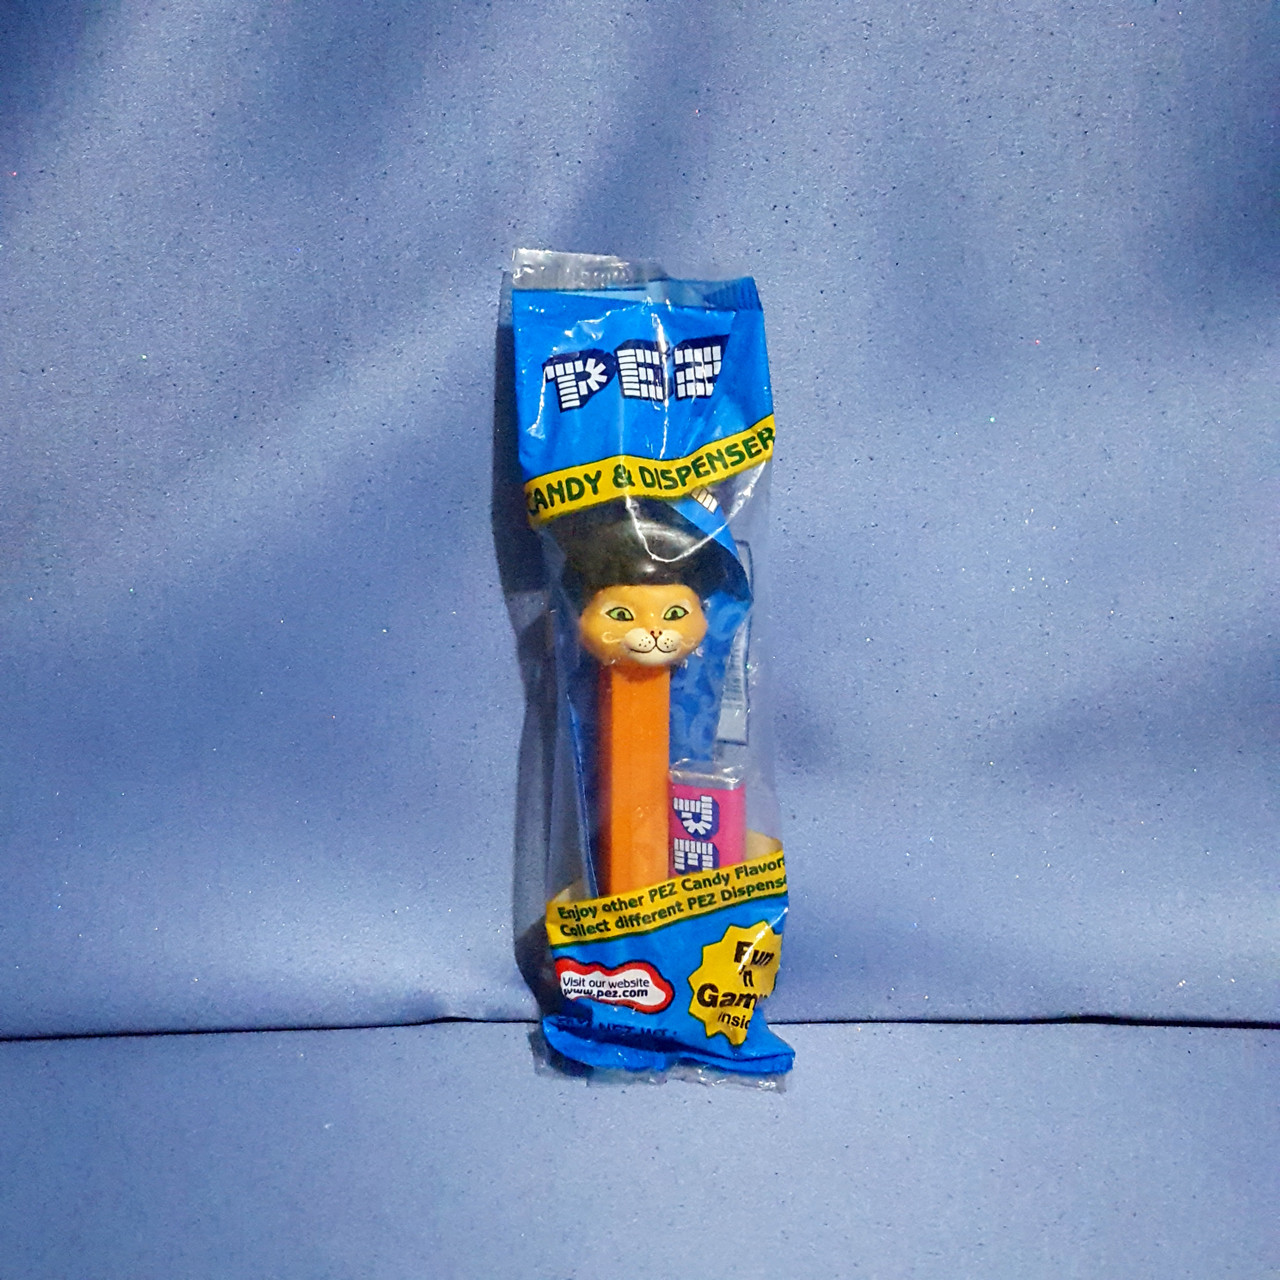 Shrek Puss N Boots Candy Dispenser By Pez B Now And Then Galleria Llc